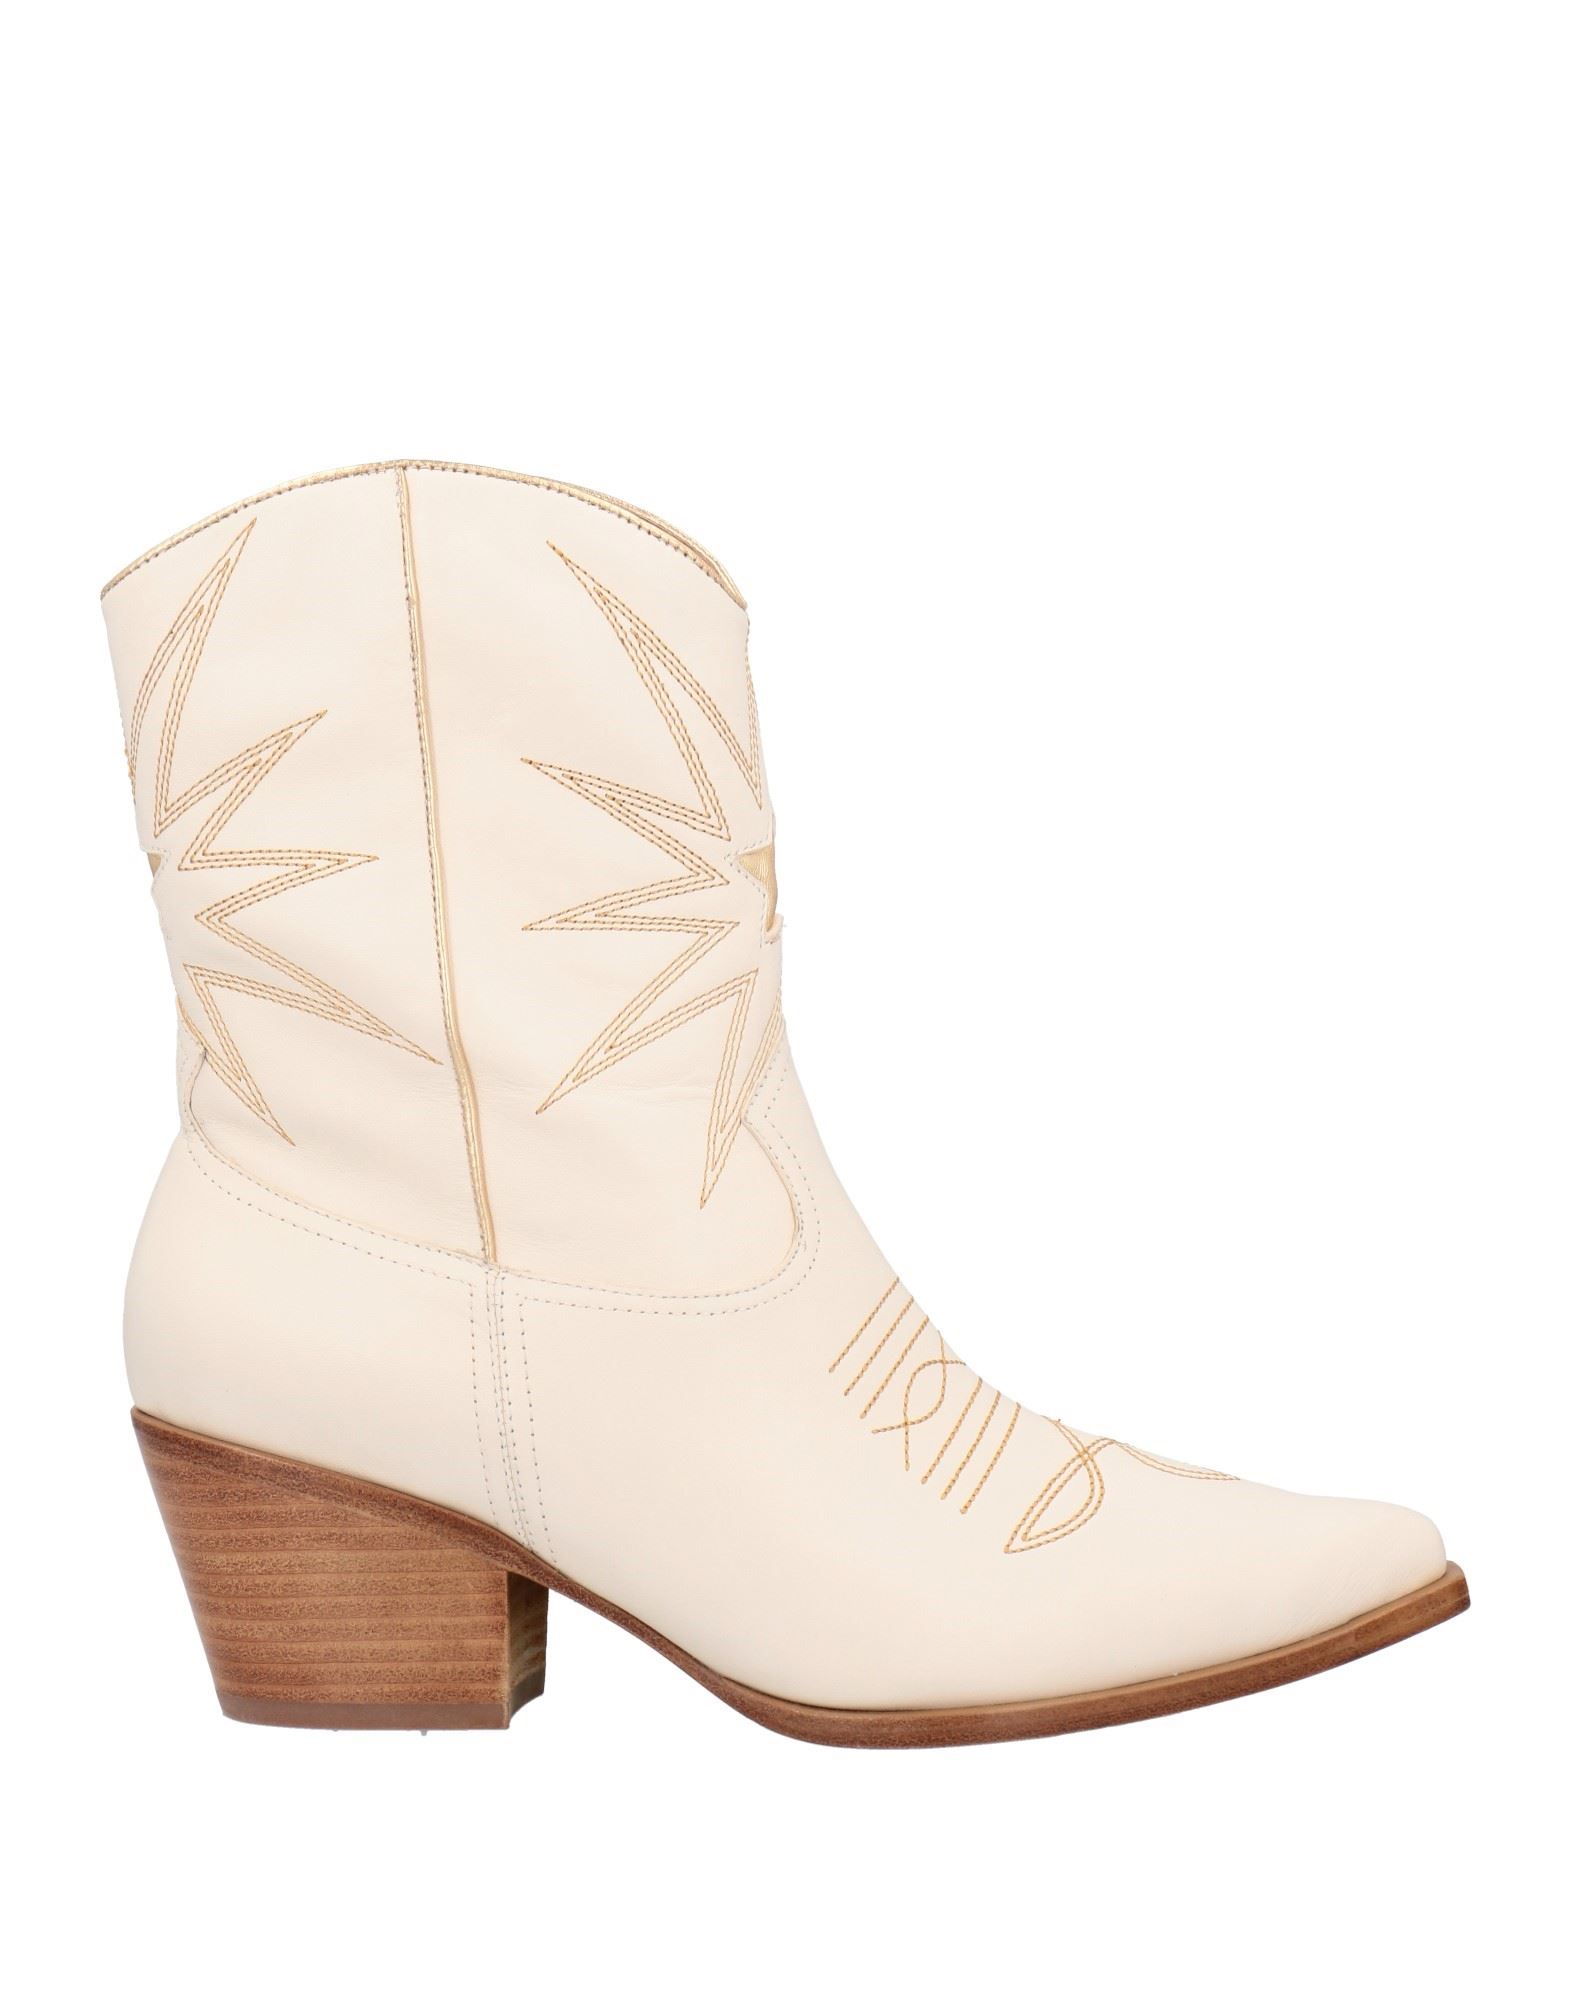 Lola Cruz Ankle Boots In Ivory